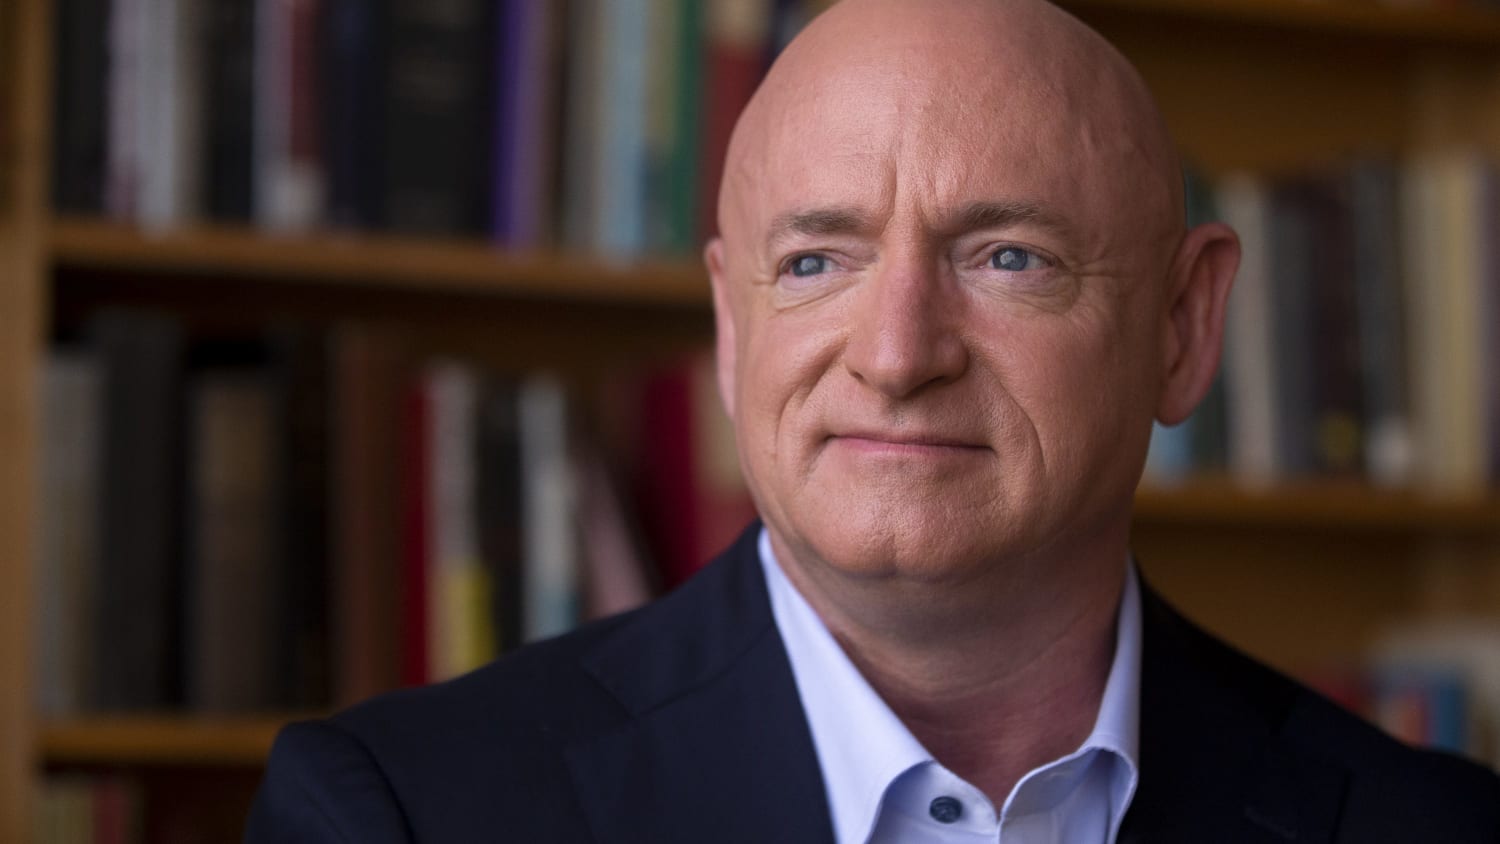 Why does Mark Kelly continue to dodge answering this important question?